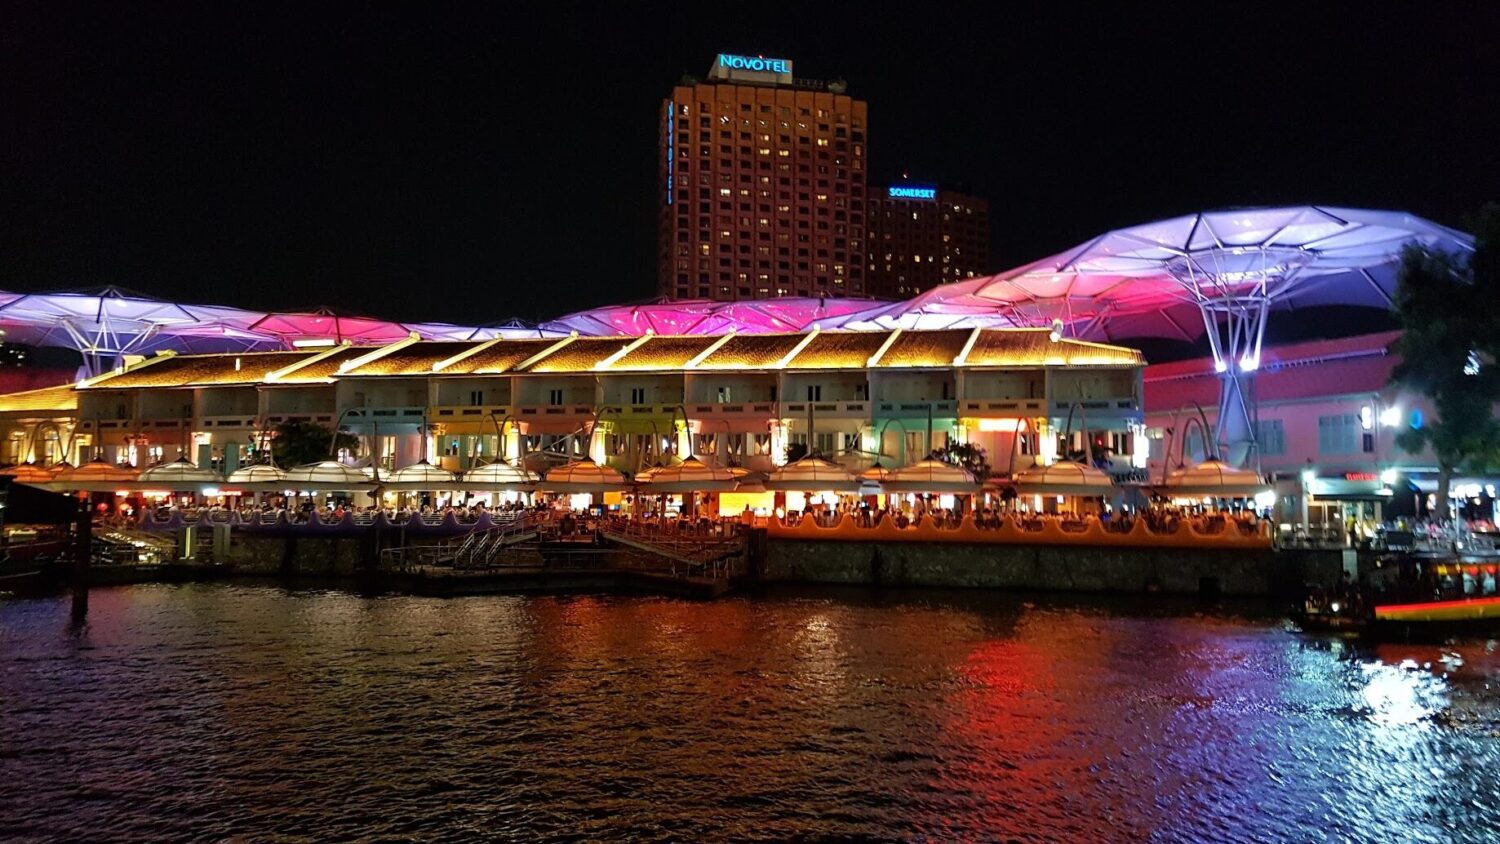 Riverfront attractions along the Singapore river in Clarke Quay at night